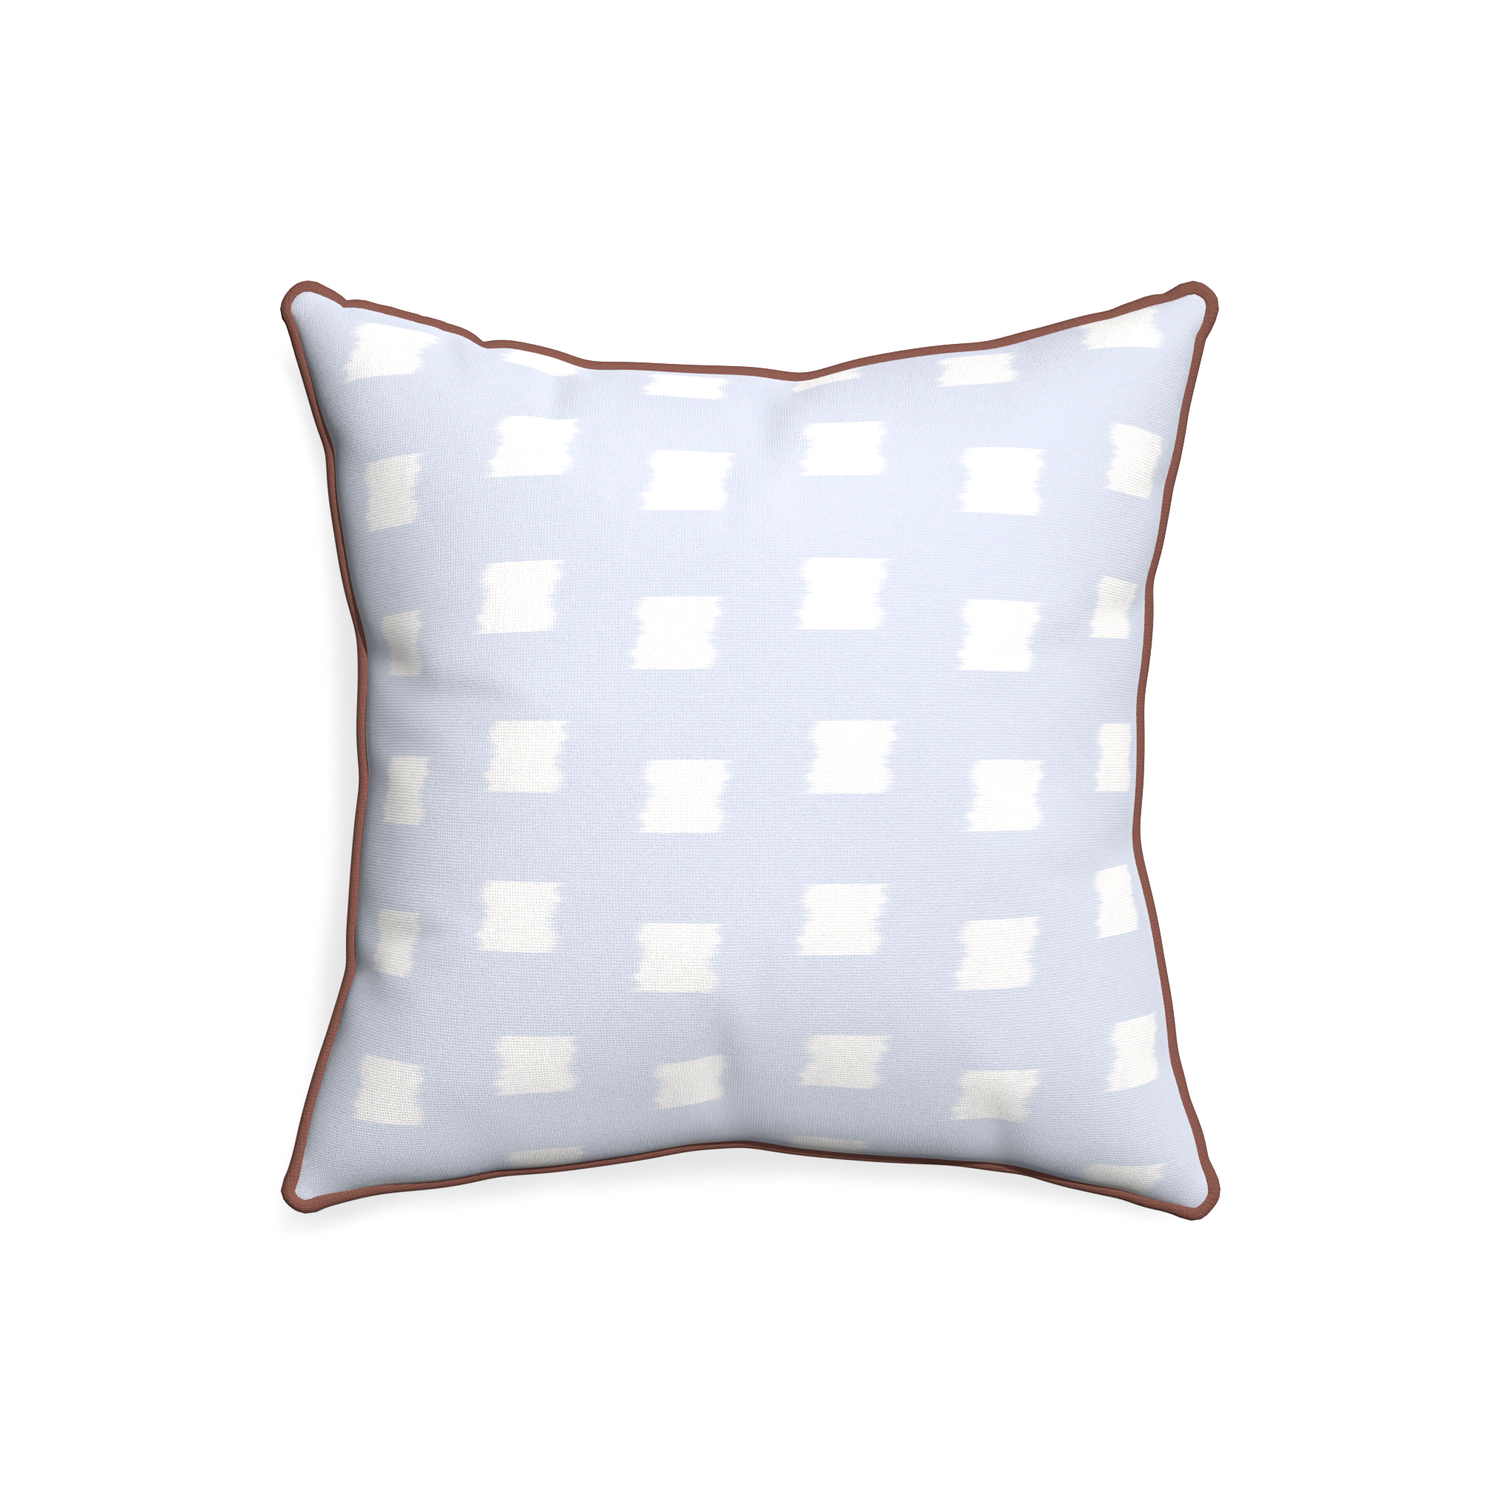 20-square denton custom pillow with w piping on white background